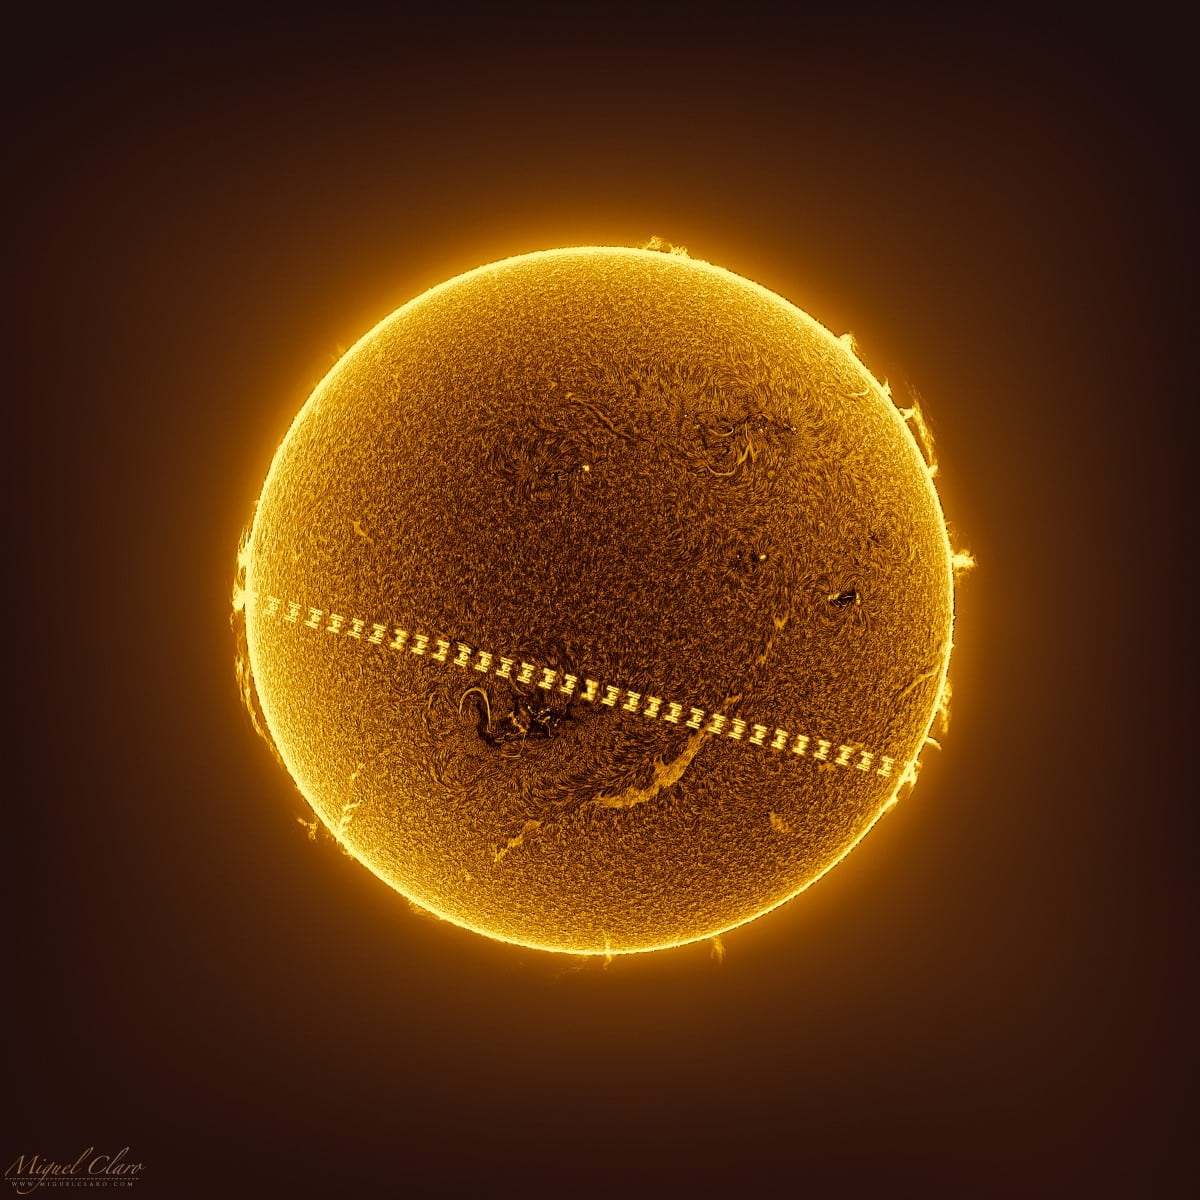 ISS Transitting the Sun by Miguel Claro